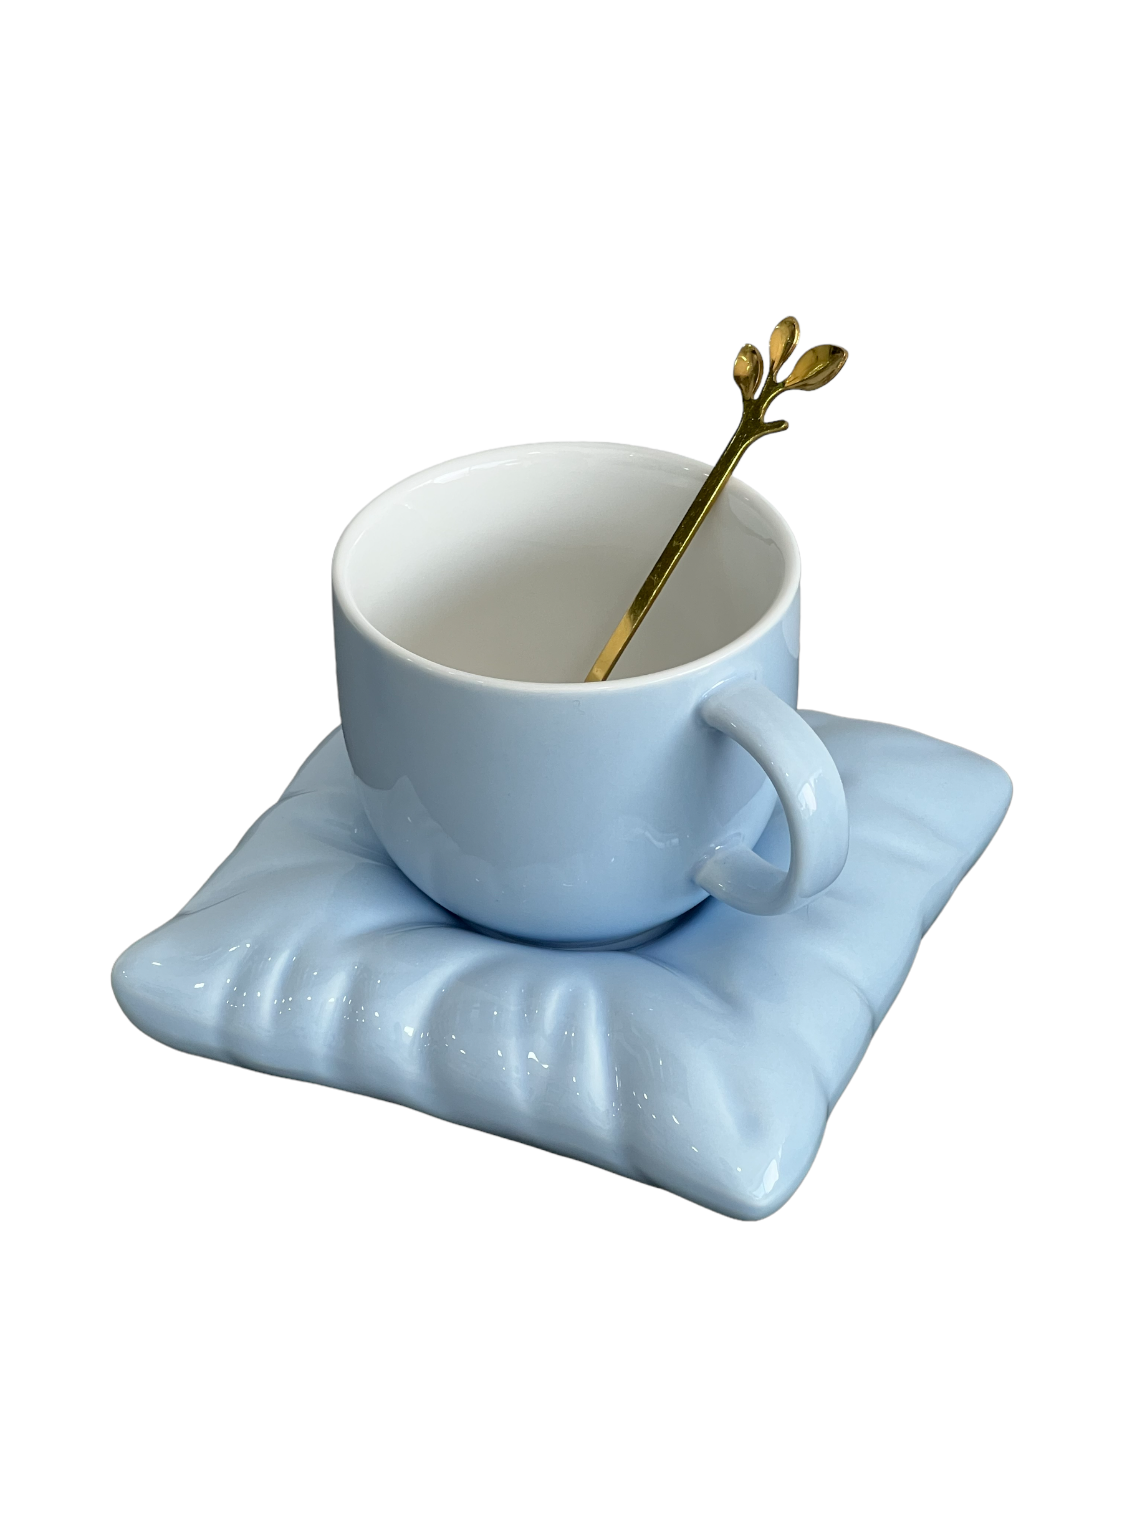 Pillow Cup in blue